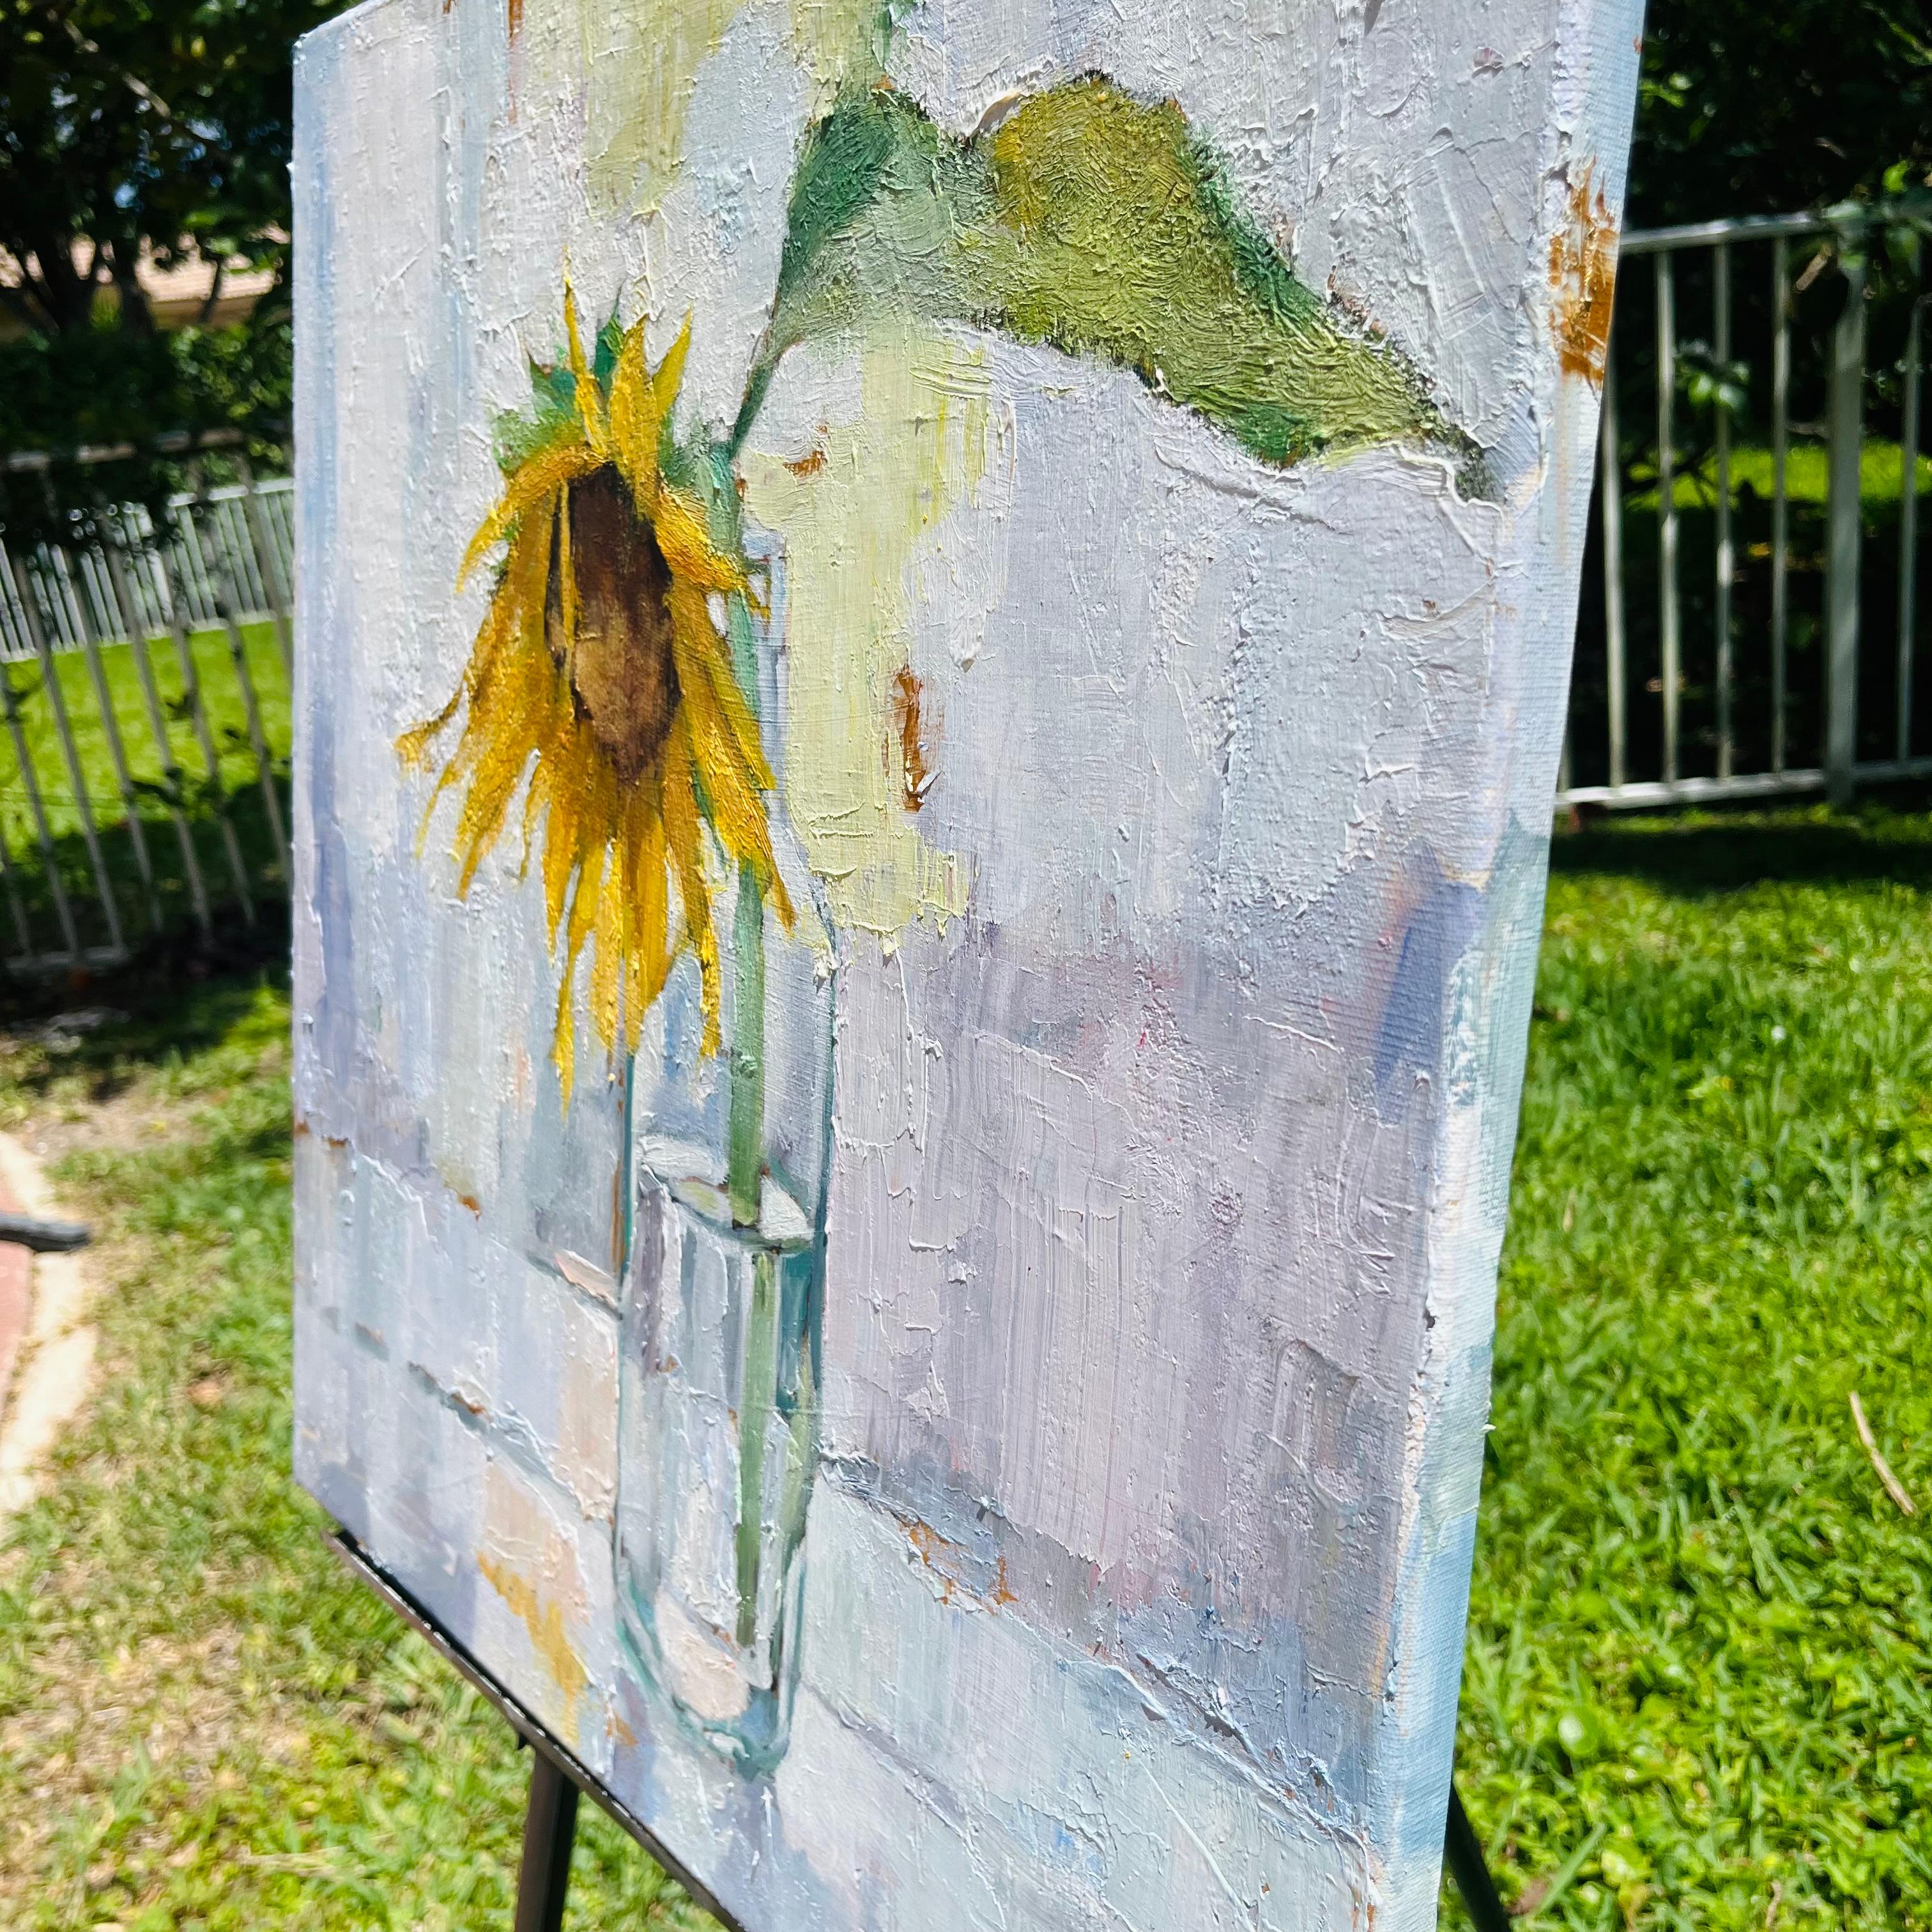 <p>Artist Comments<br>A single sunflower gracefully droops from a clear bottle. The textured impasto strokes accentuate its fragile form. Its vibrant yellow petals contrast against the serene neutrality of the background.</p><br/><p>About the